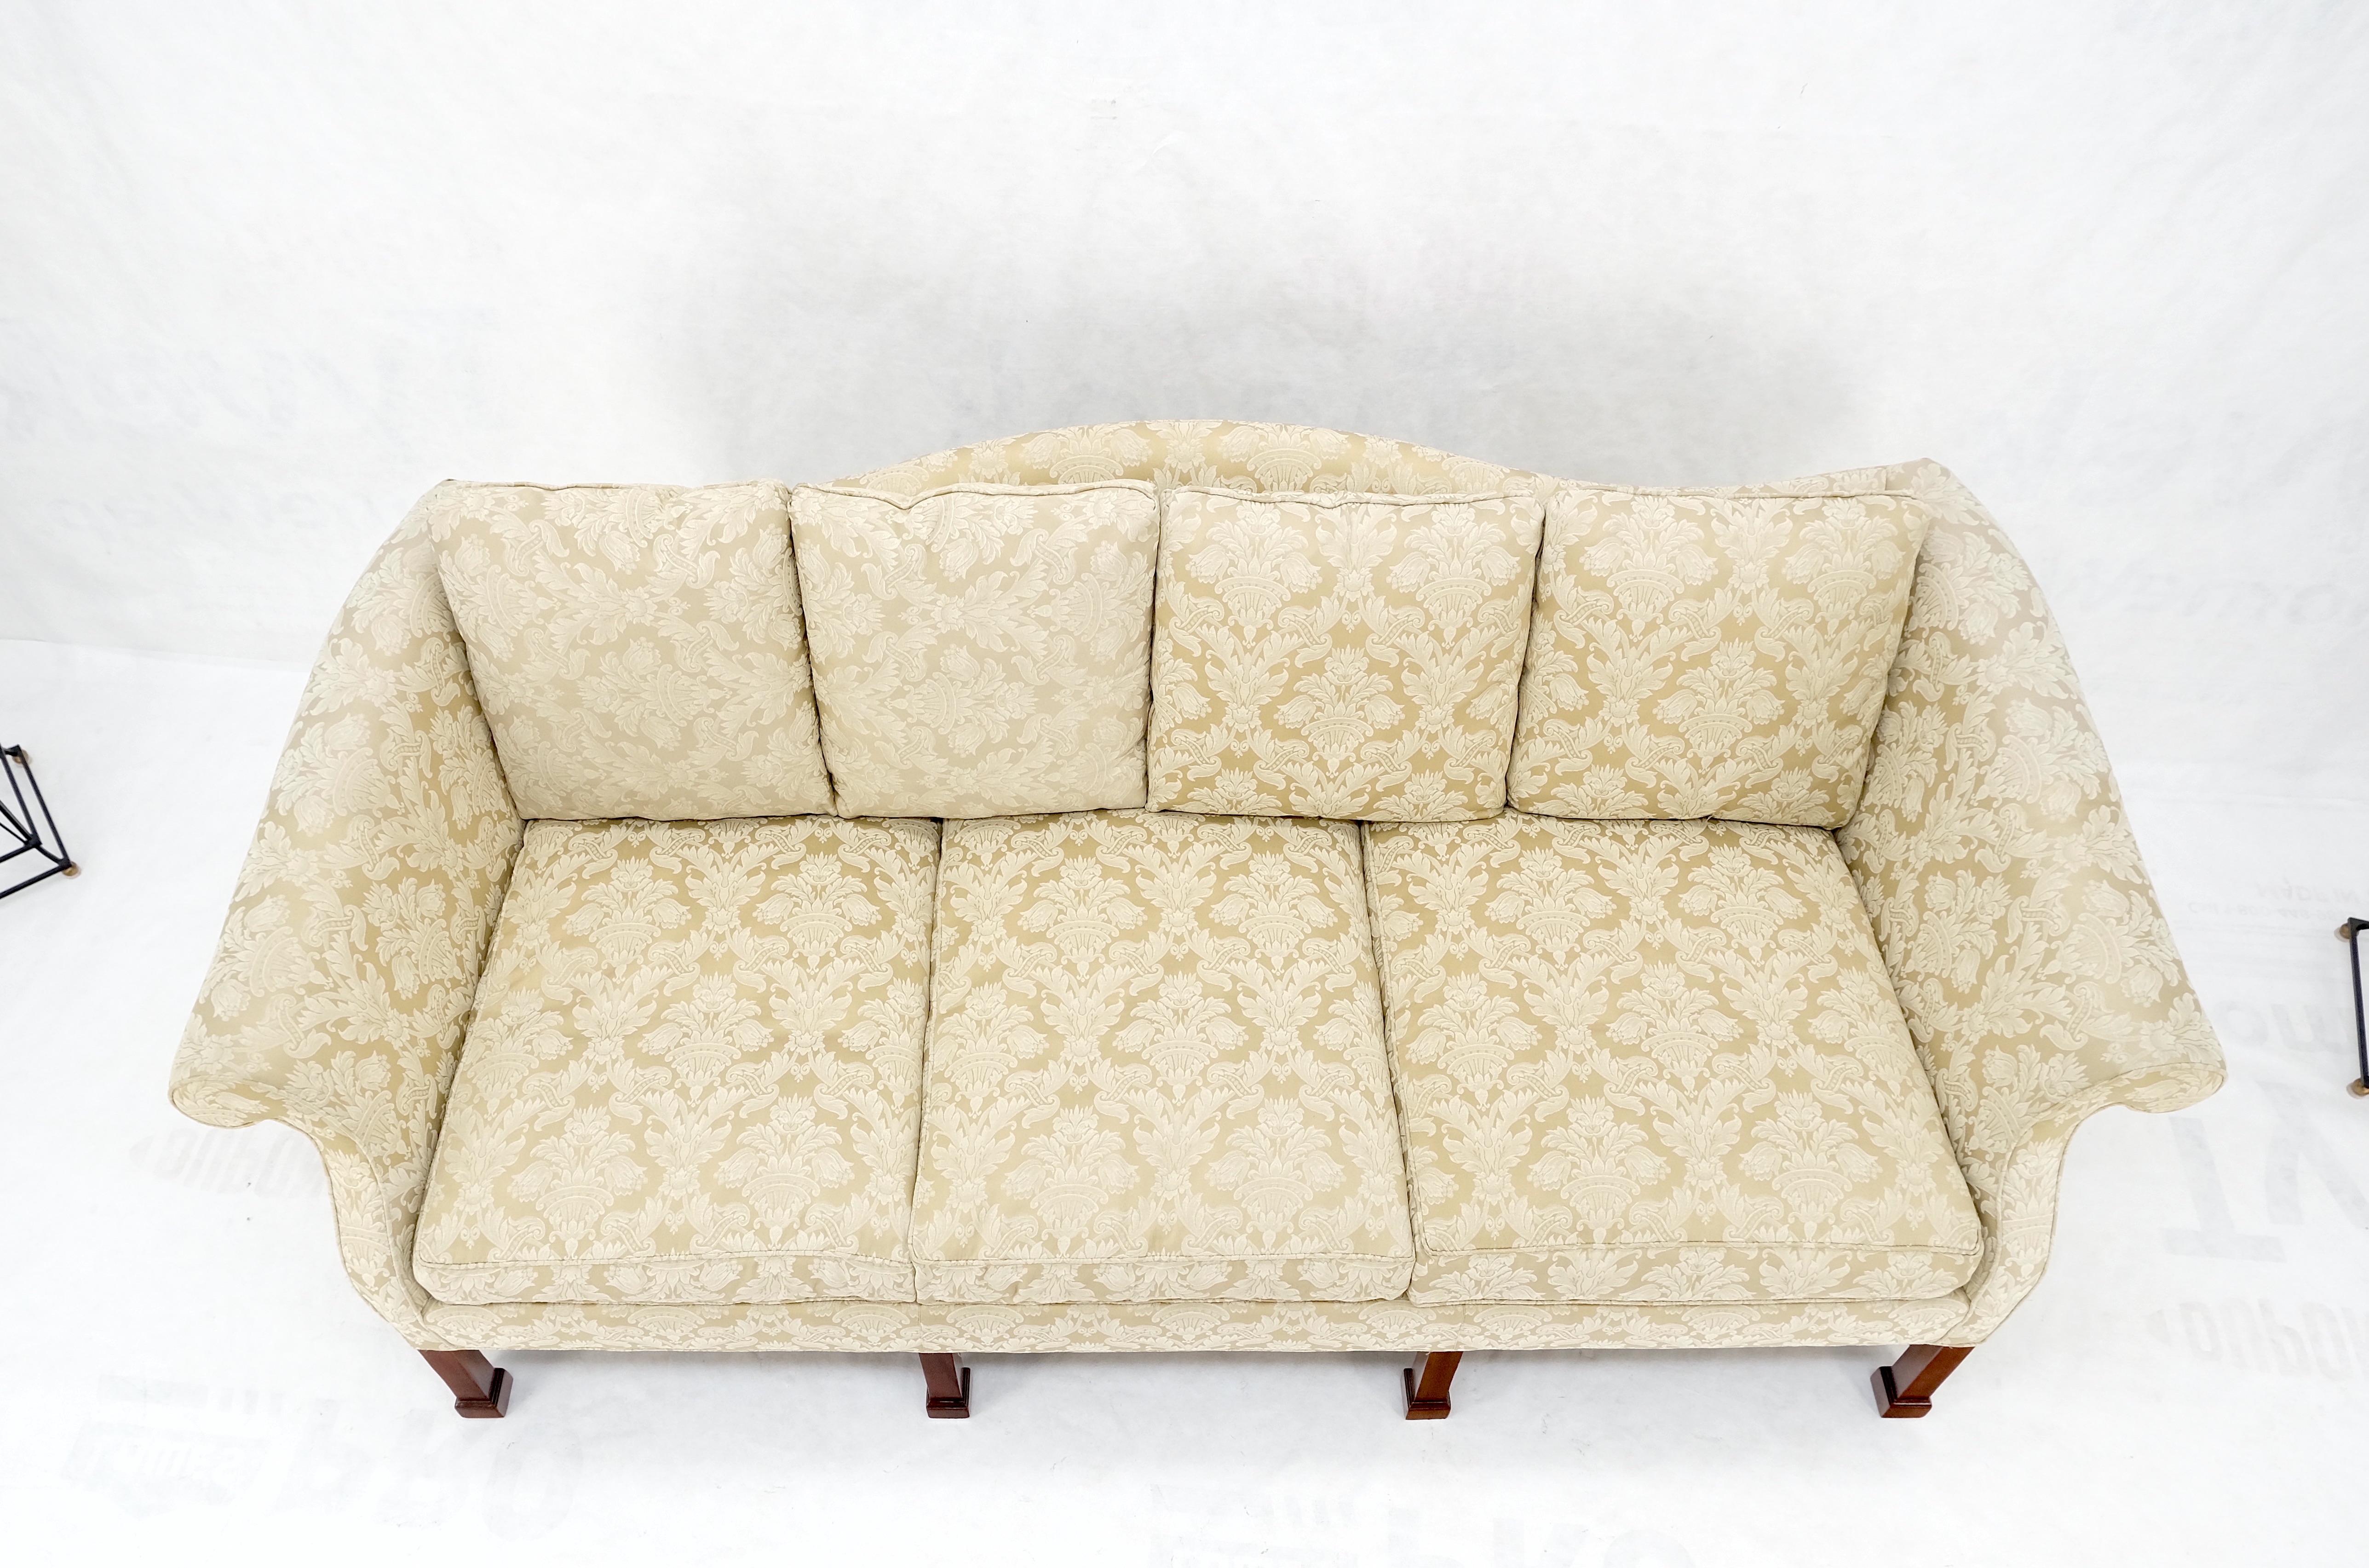 American Camel Back Federal Style Mahogany Stretcher Base Beige Upholstery Sofa Mint! For Sale